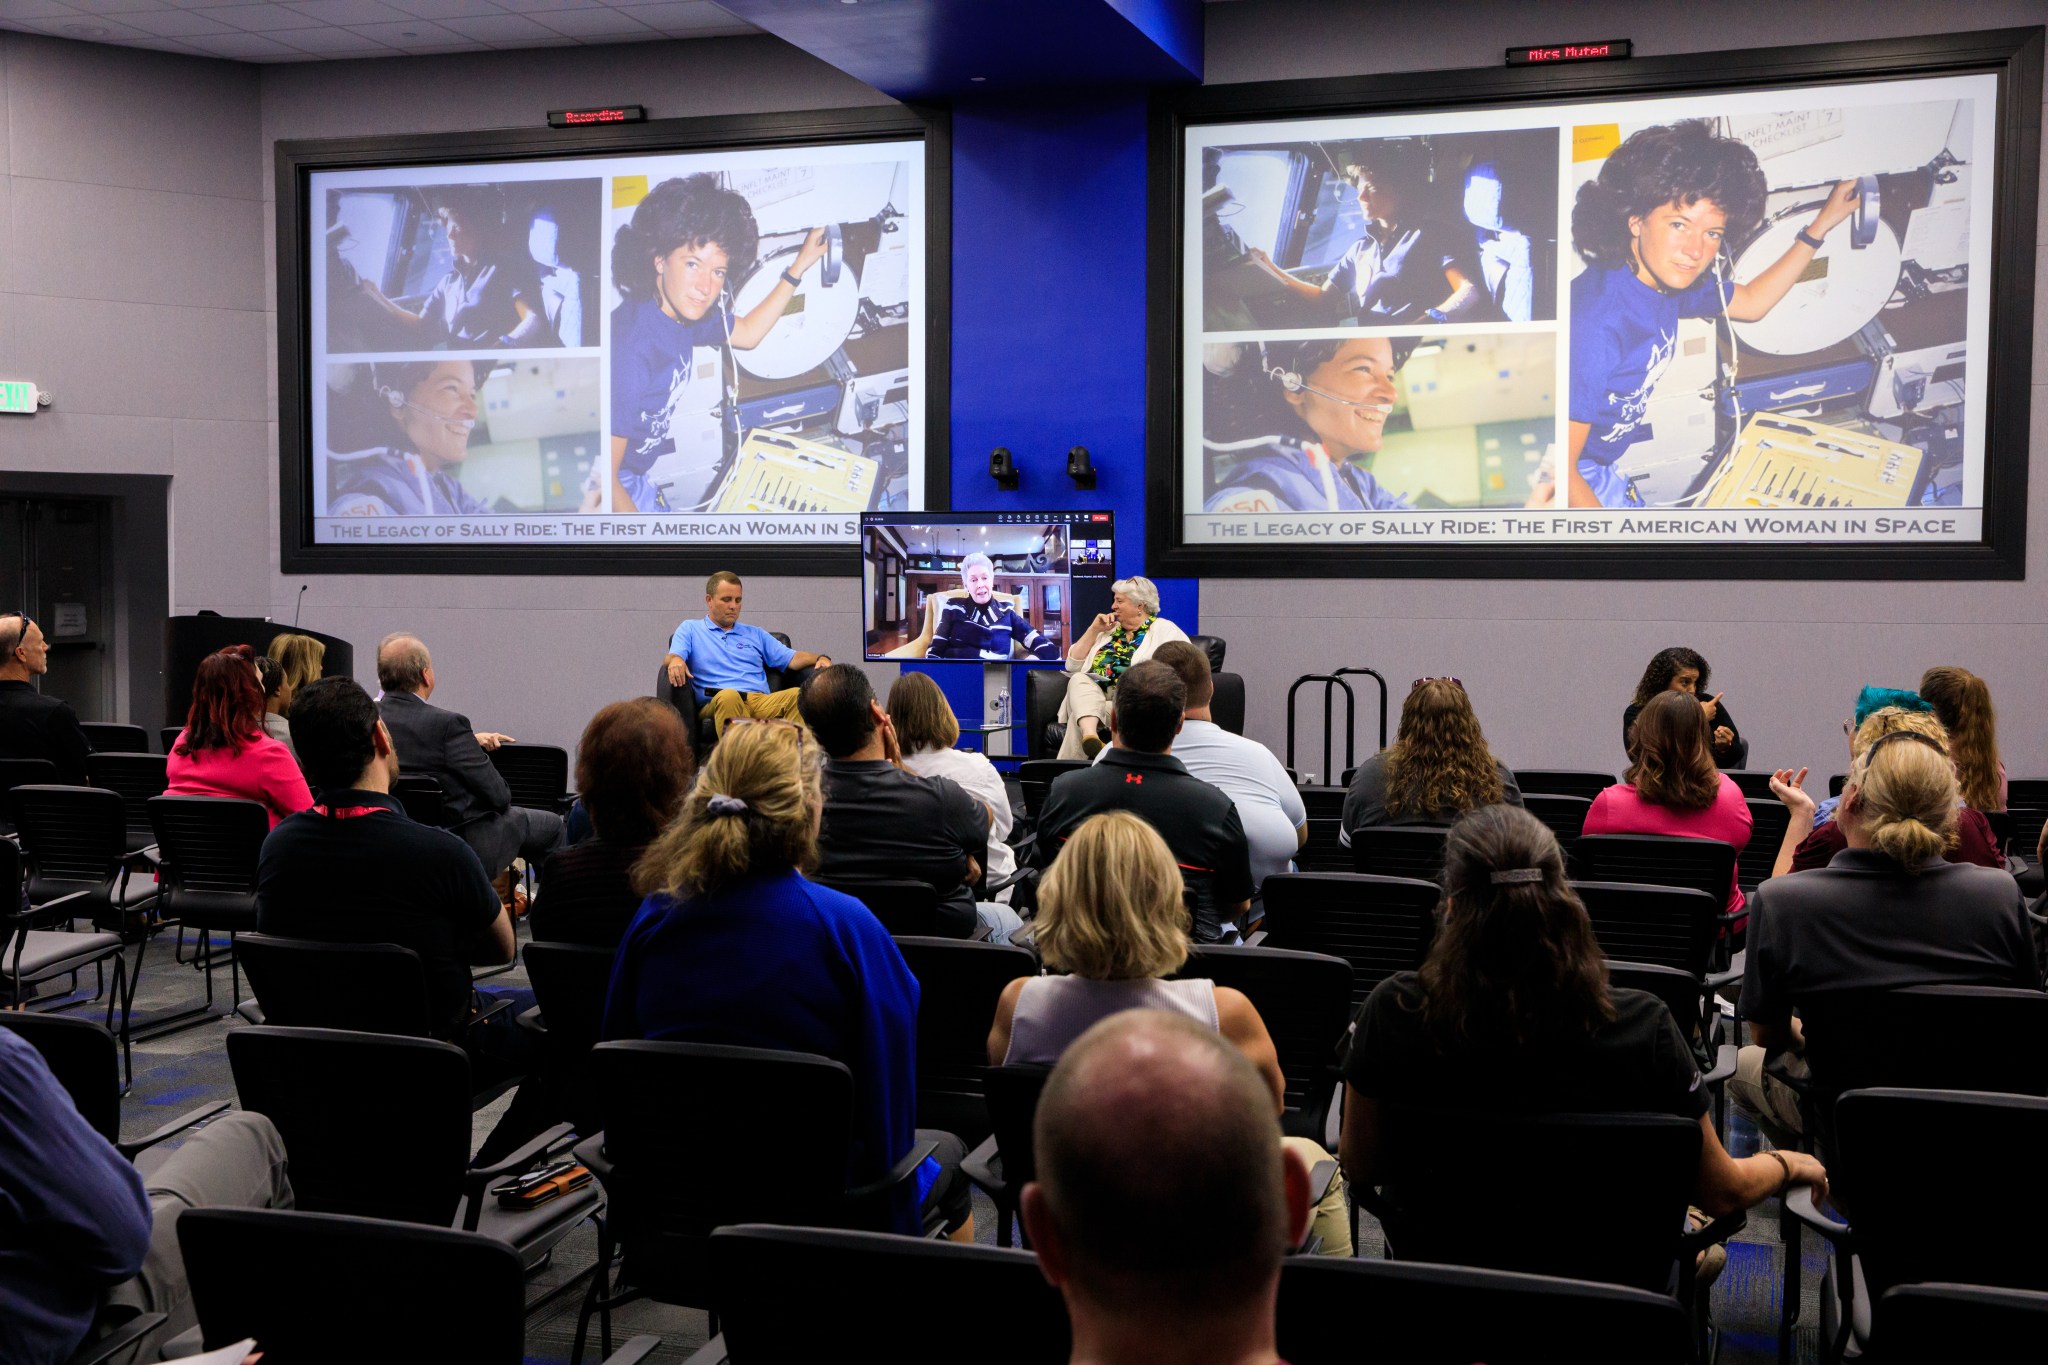 Kennedy Space Center employees attend “The Legacy of Sally Ride: The First American Woman in Space” event at Kennedy Space Center in Florida.